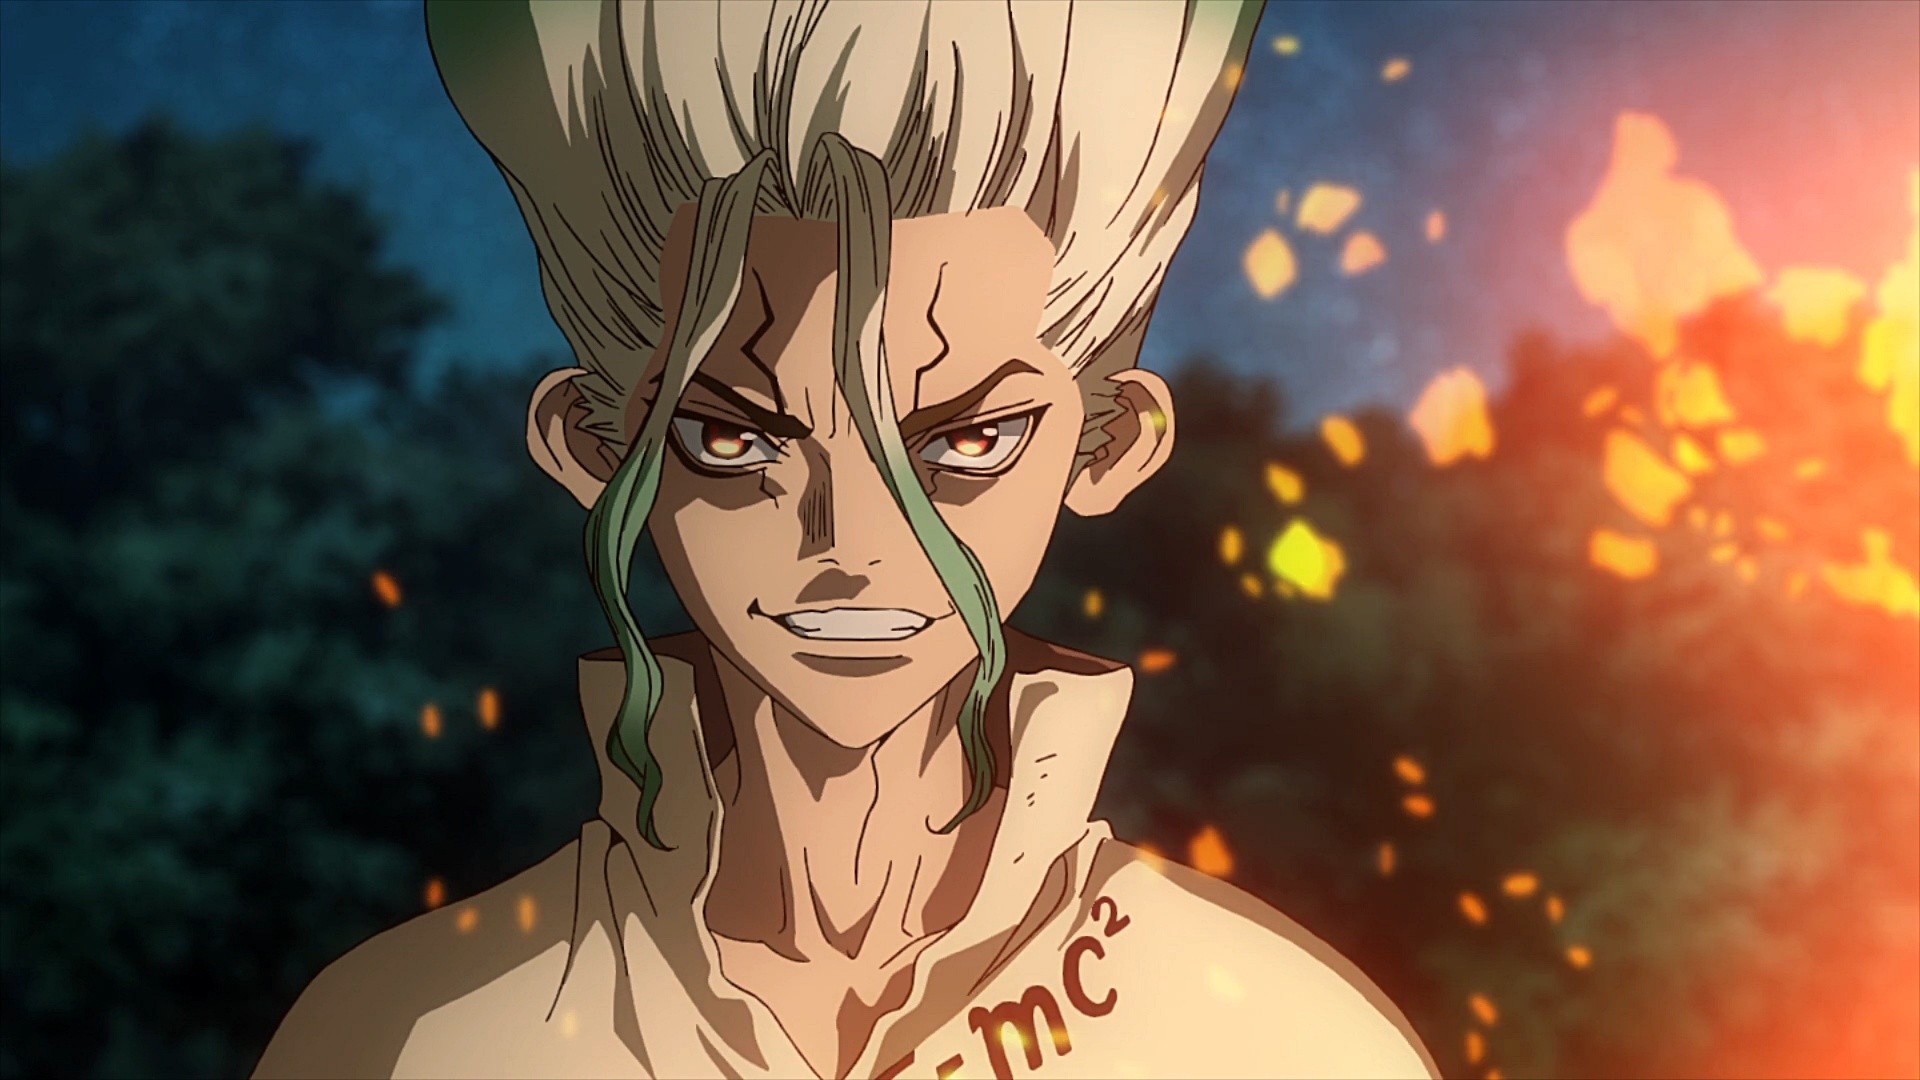 Senku, the protagonist of Dr. Stone, smiling at the camera as sparks fly from a bonfire. 